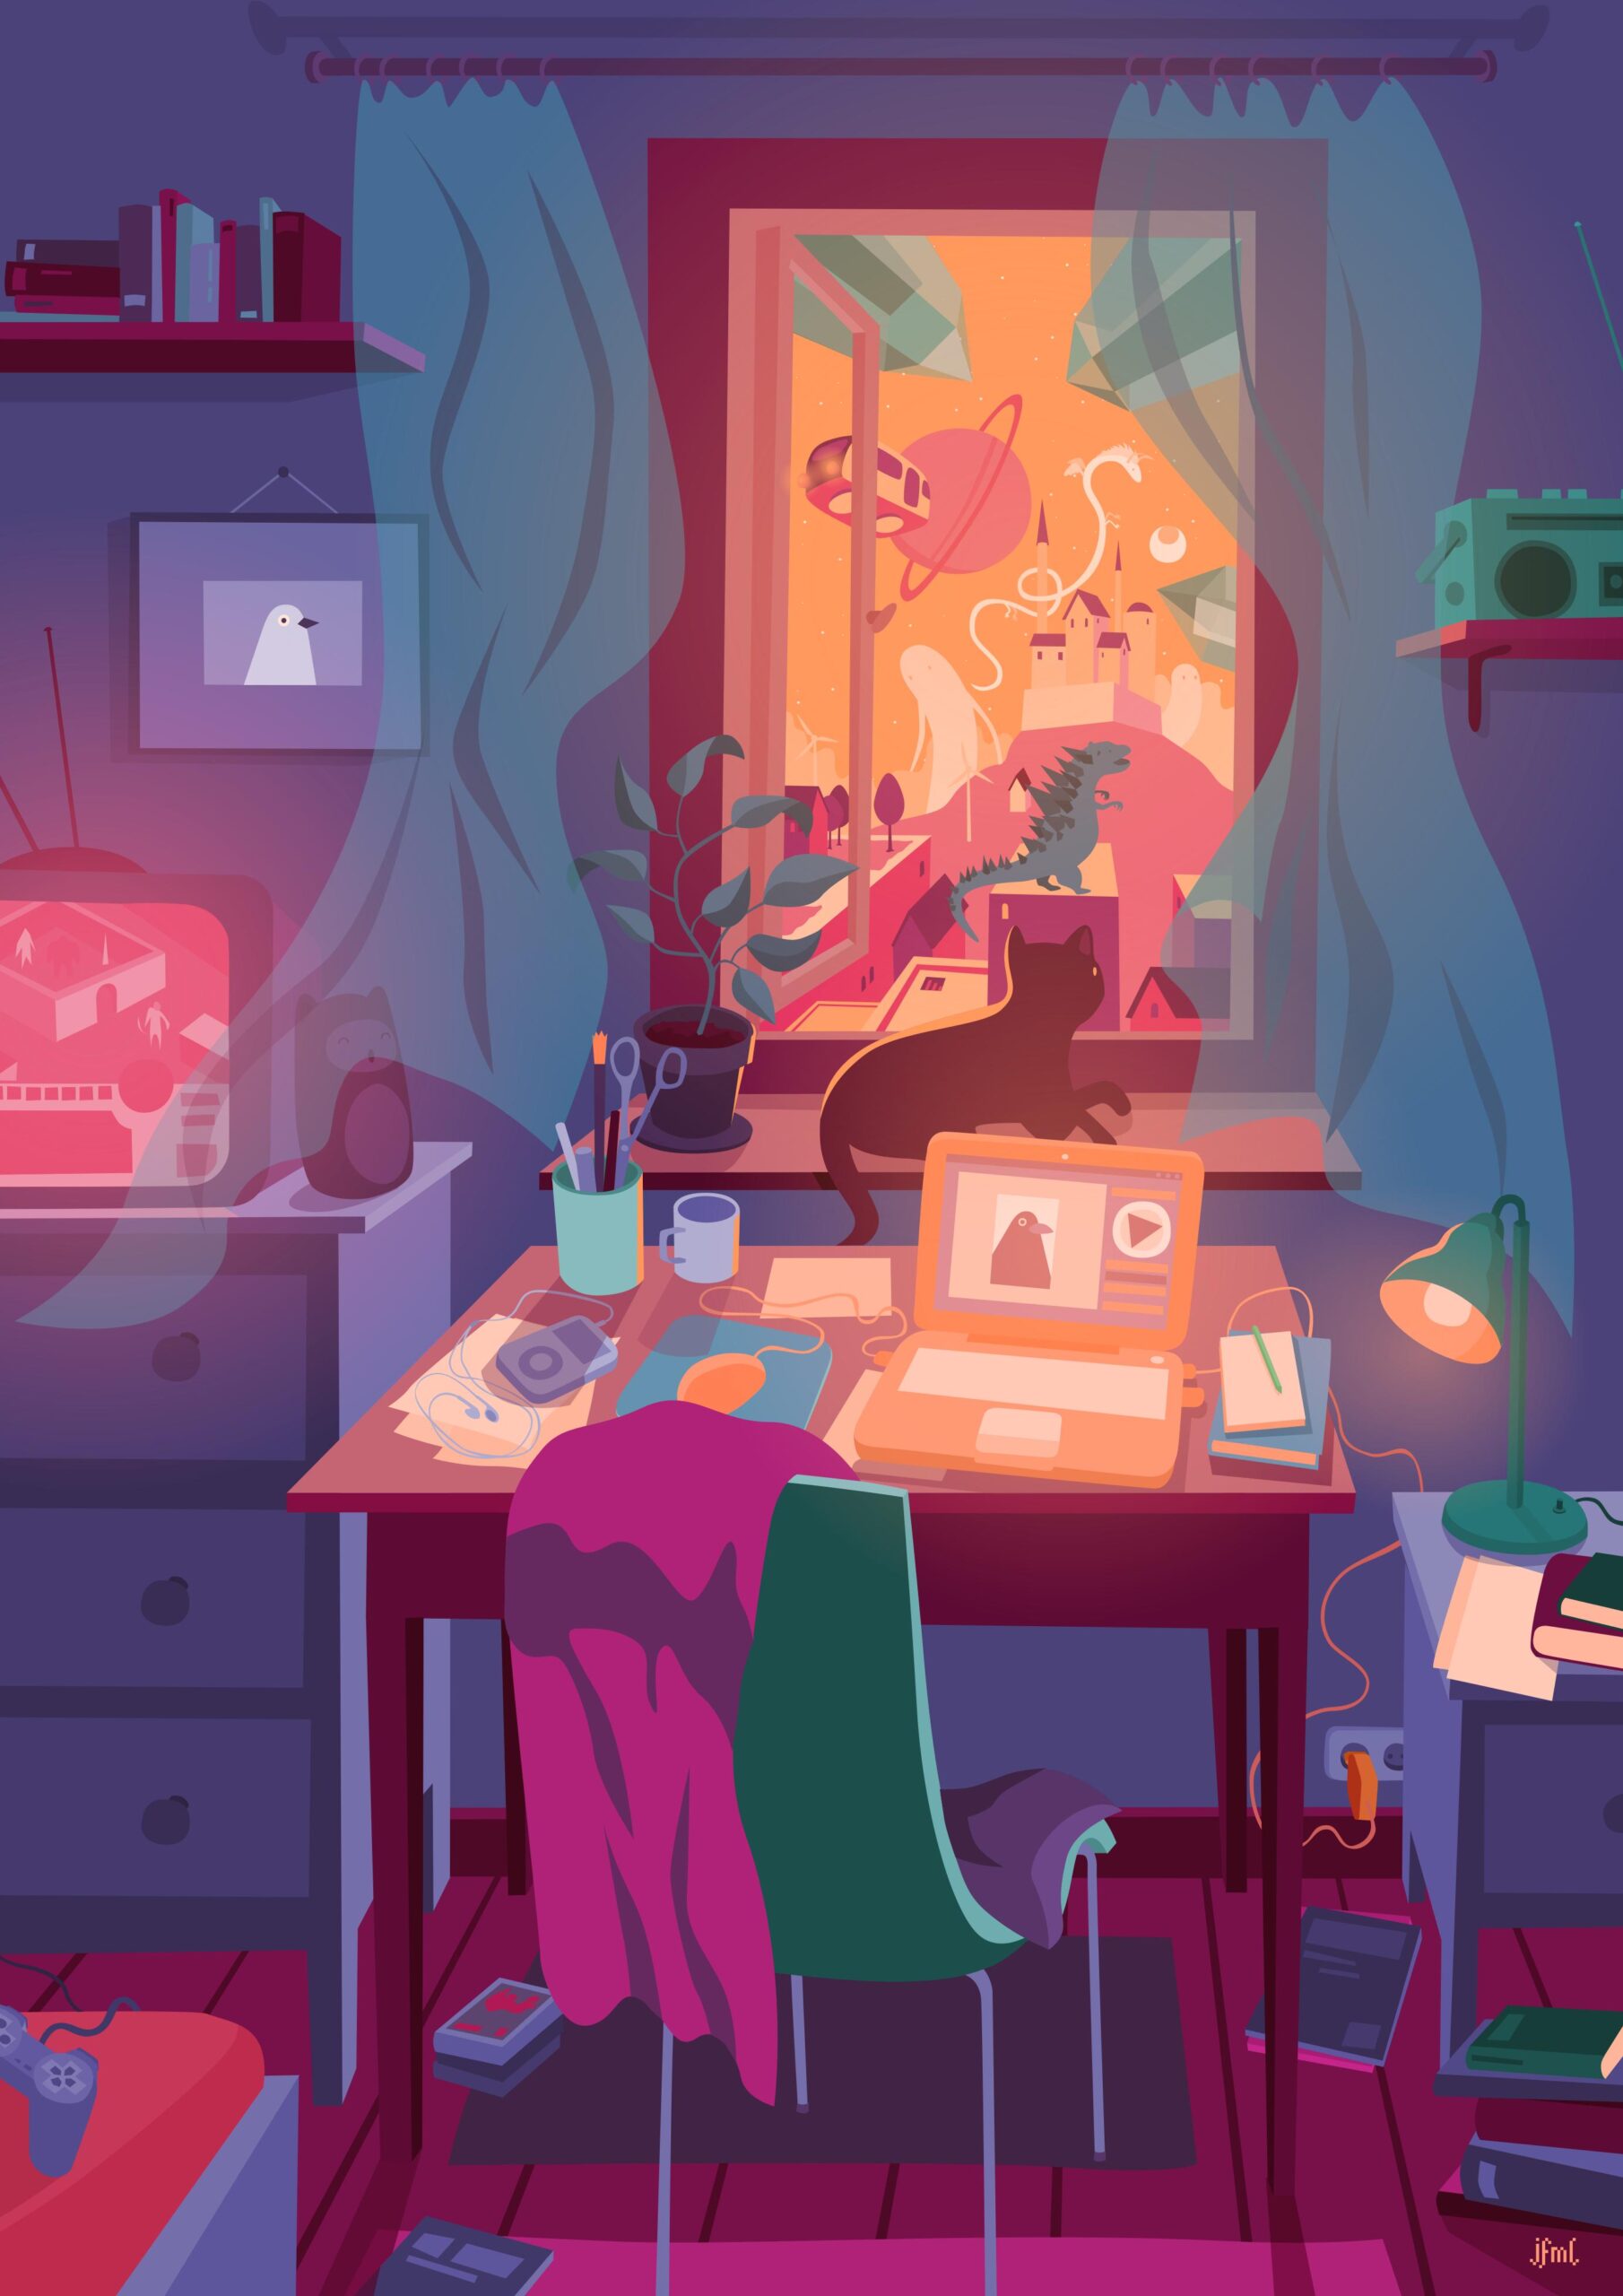 Full version of the same drawing showing more of the room, on the left there's an original Playstation running Diablo on an old TV. On the right an old-school cassette player/radio and a bedside cupboard. Lots of books, manga and magazines are strewn all over the room.